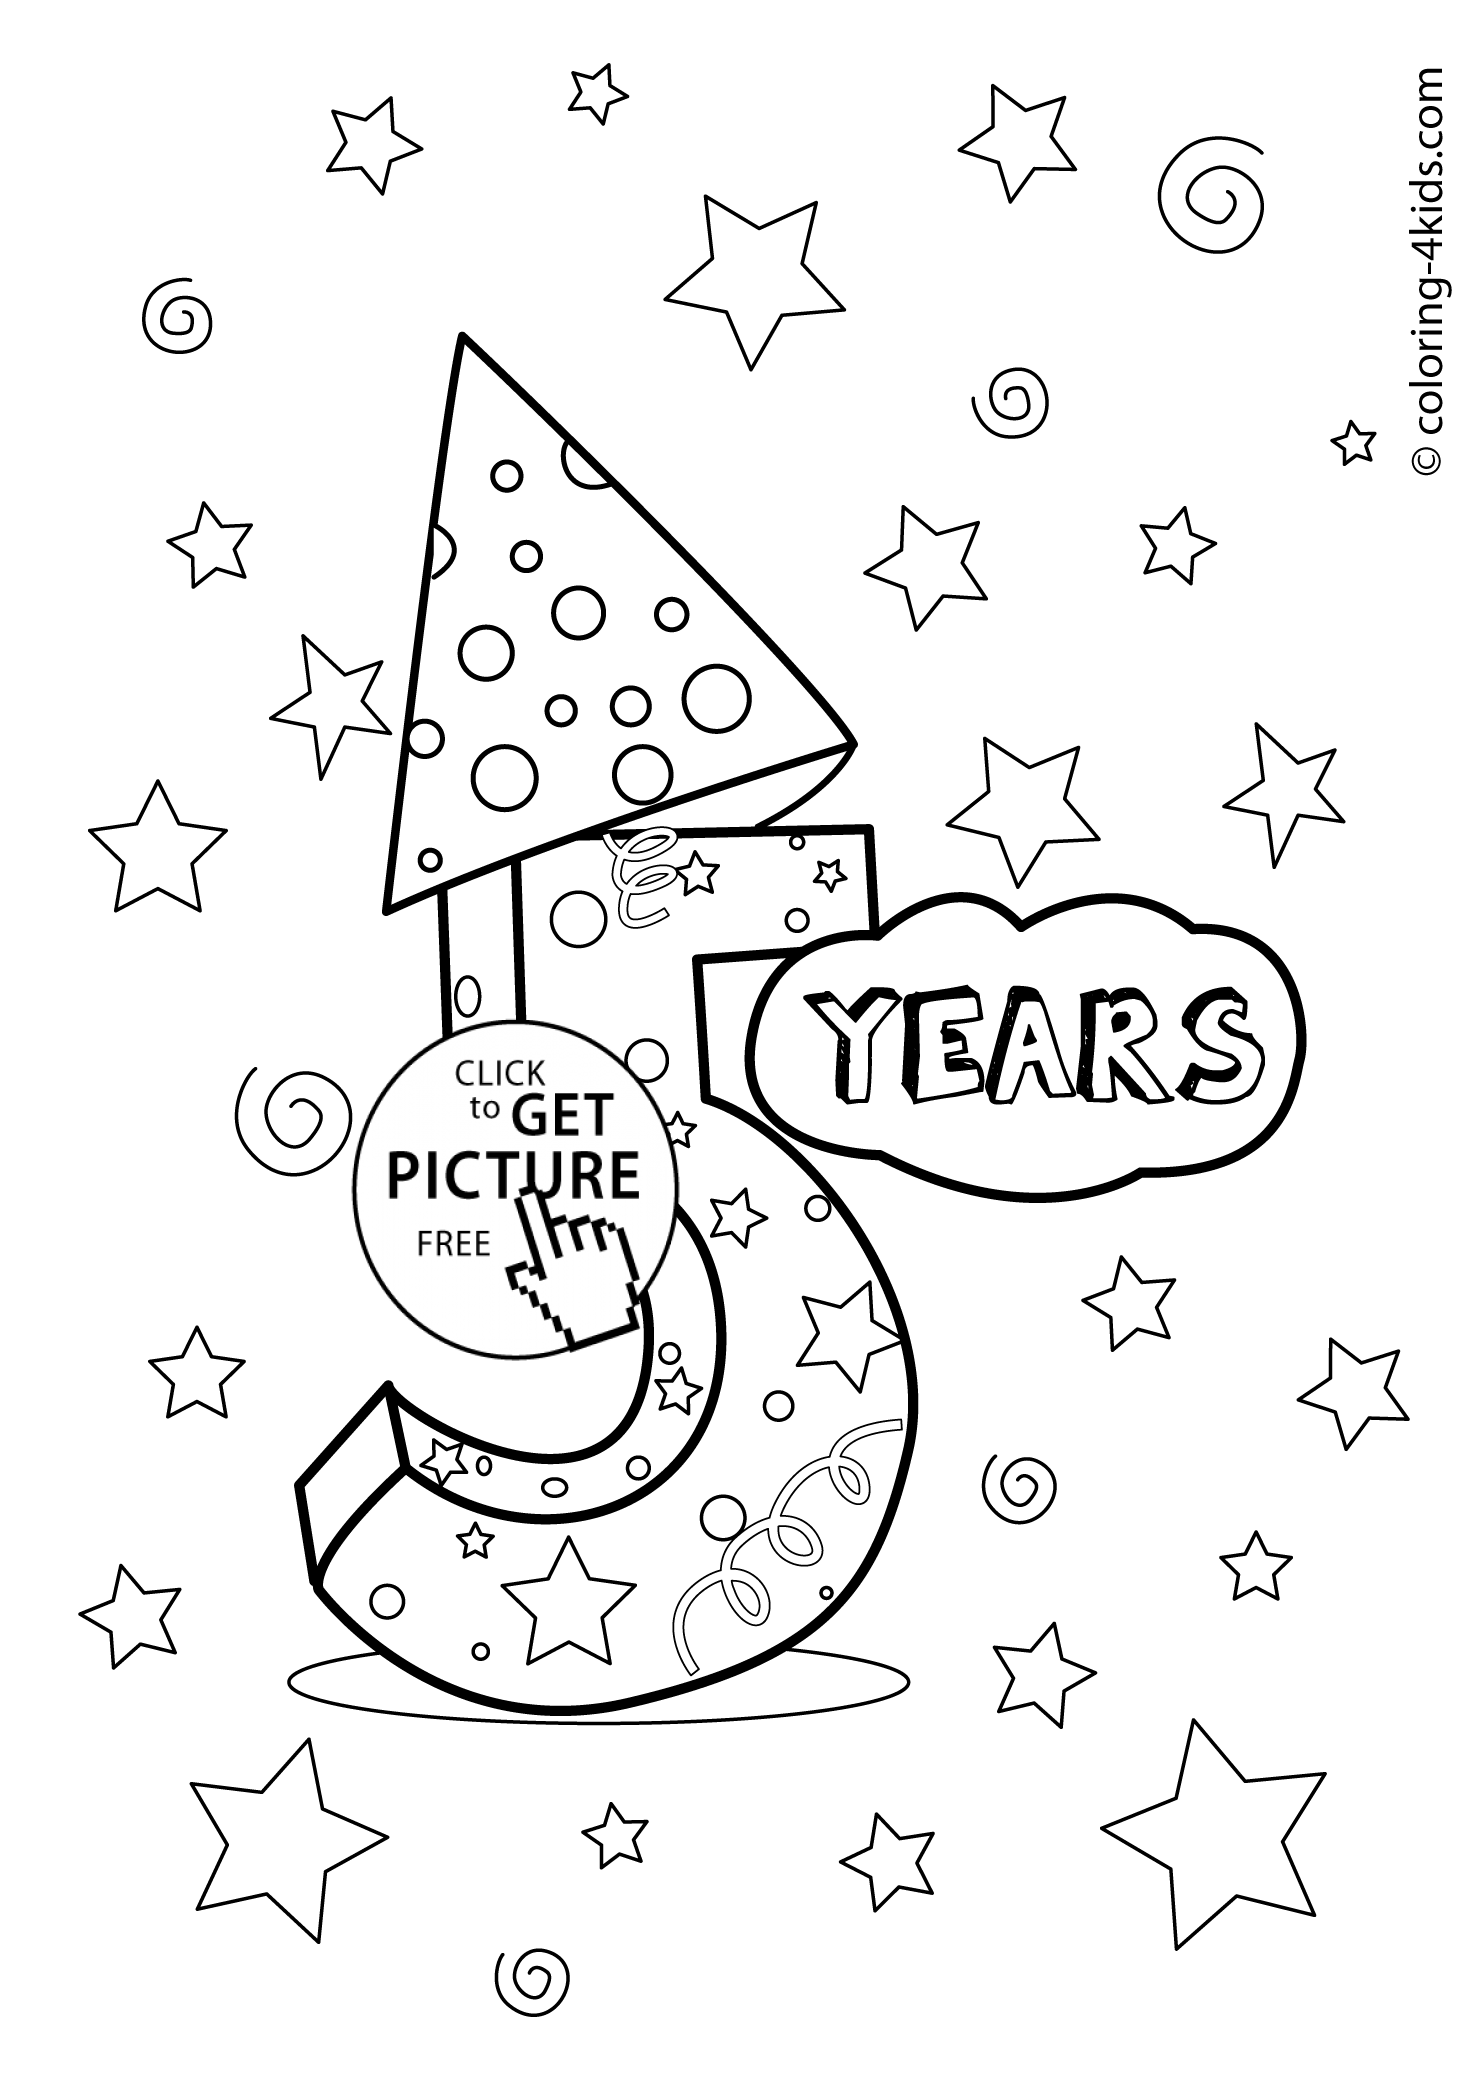 5 years, birthday coloring pages for kids, printables